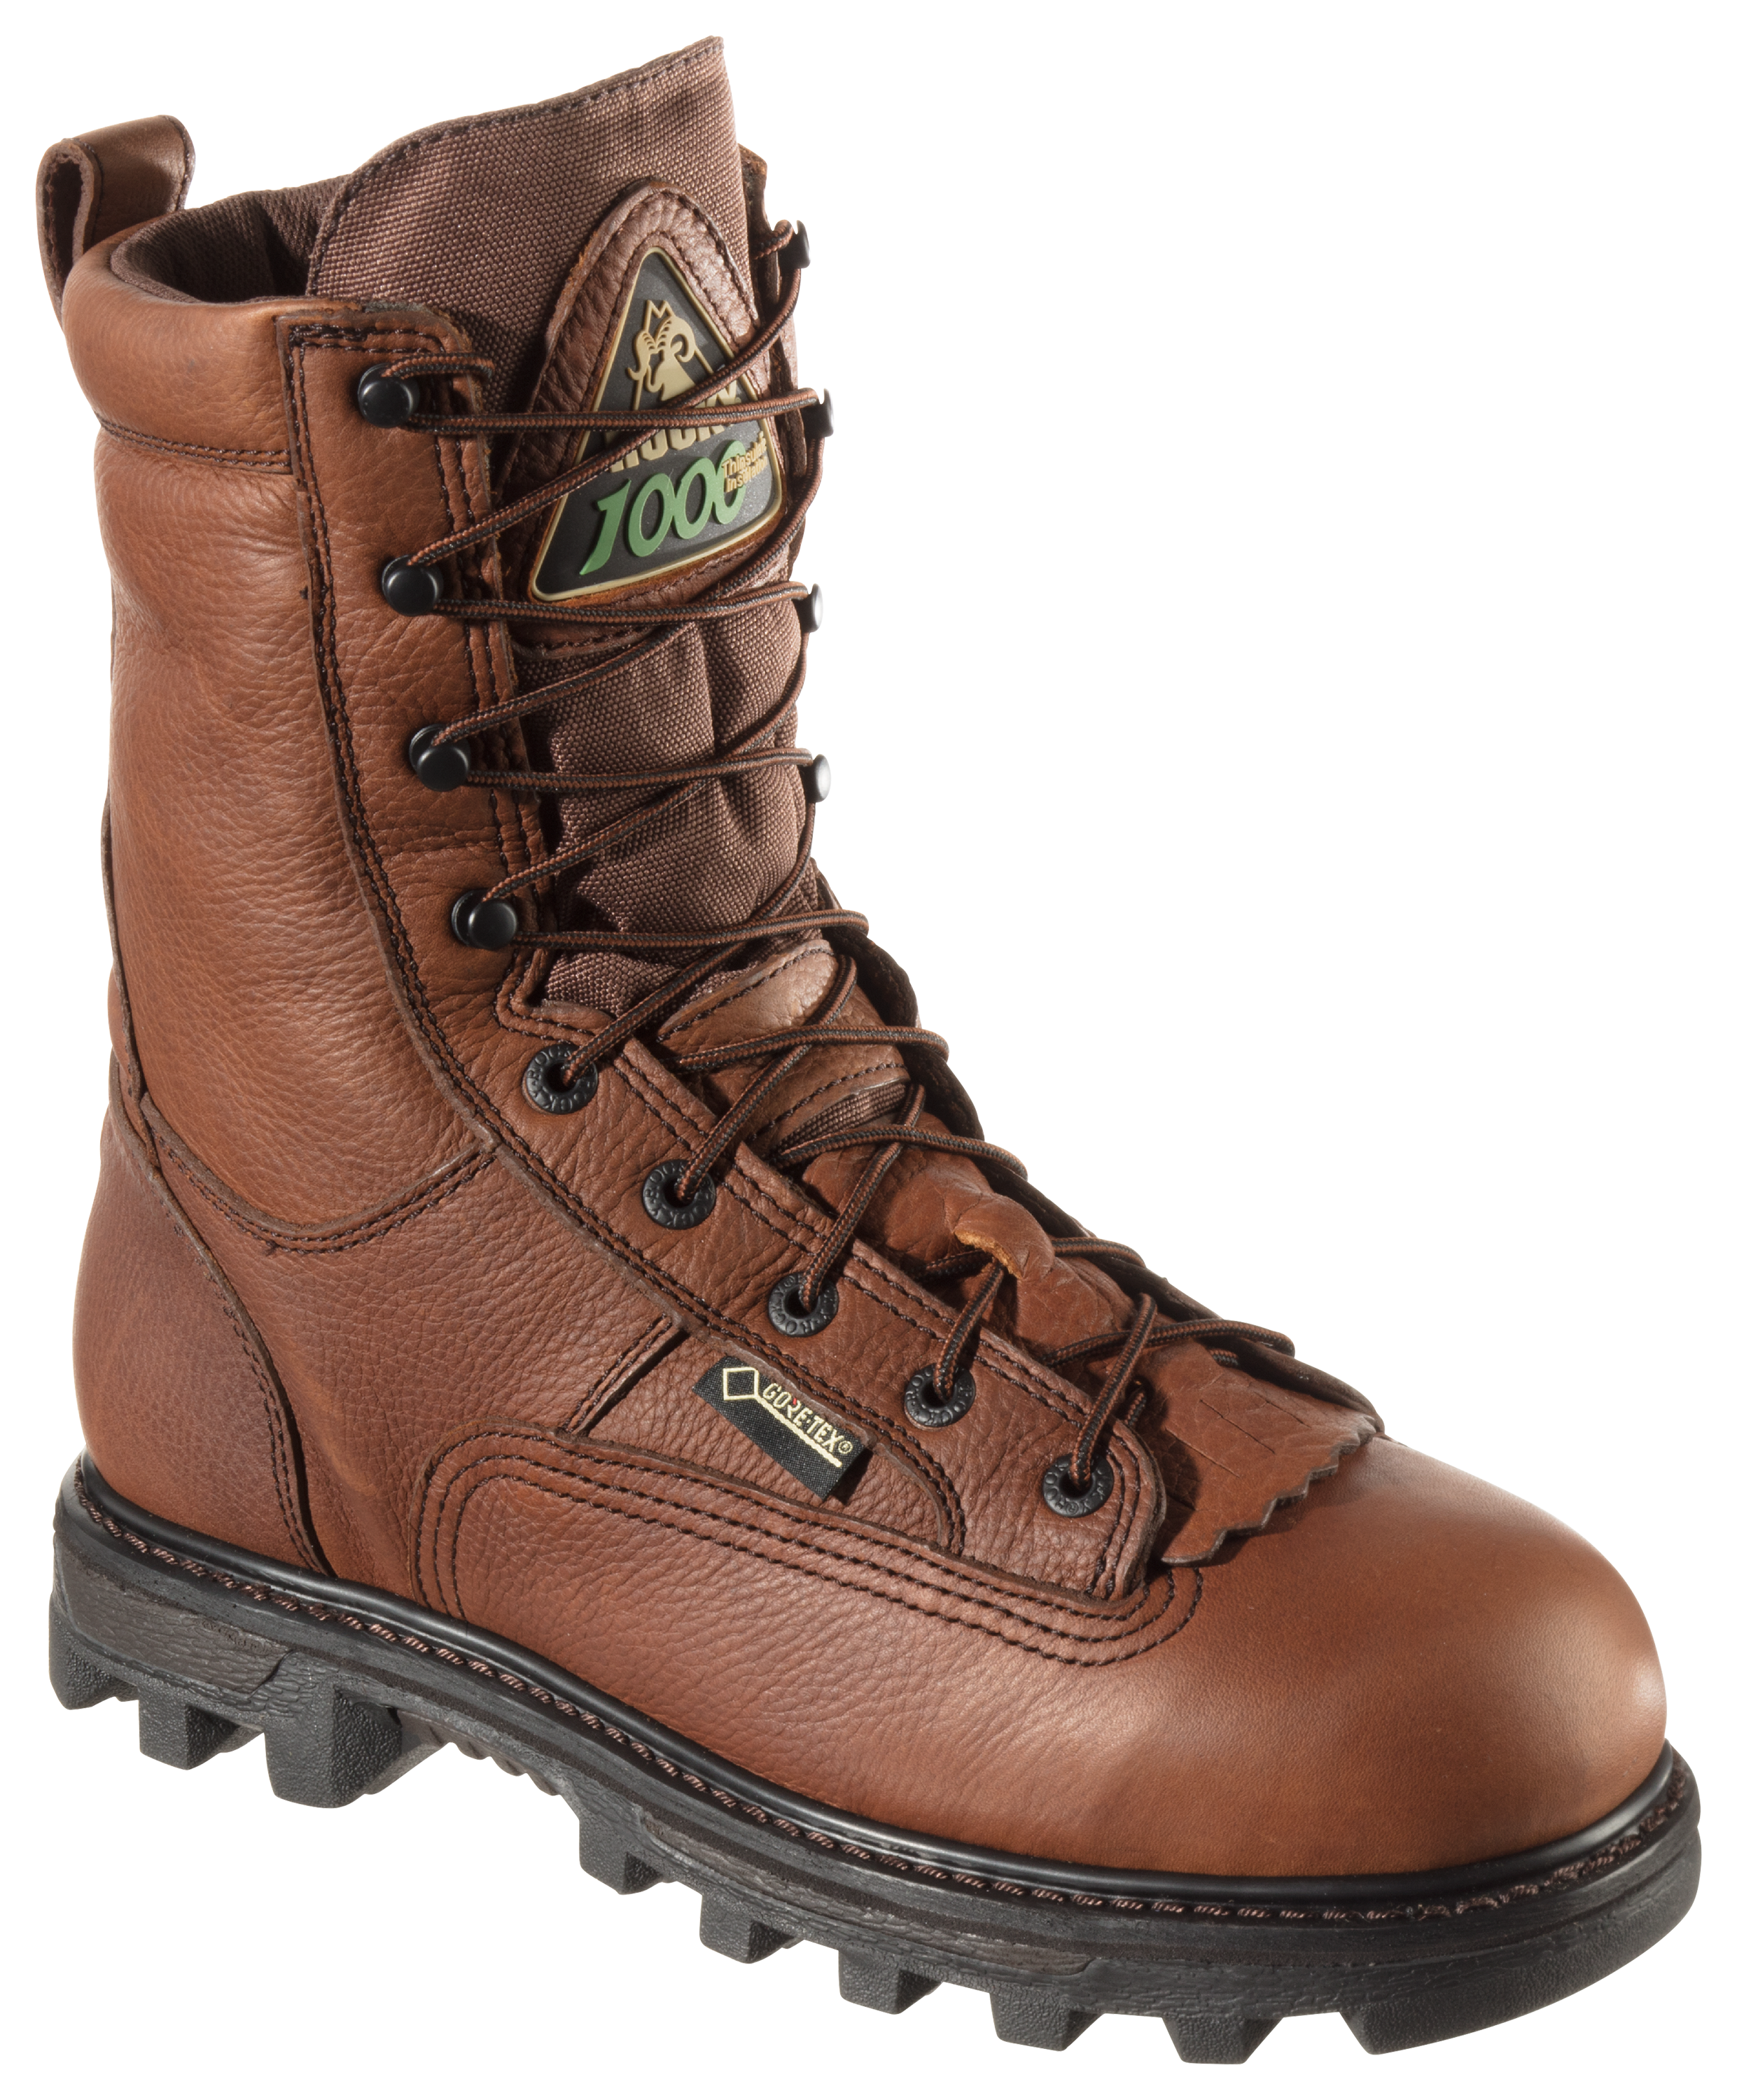 ROCKY BearClaw 3D GORE-TEX 1,000-Gram Insulated Hunting Boots for Men - Brown - 10.5W